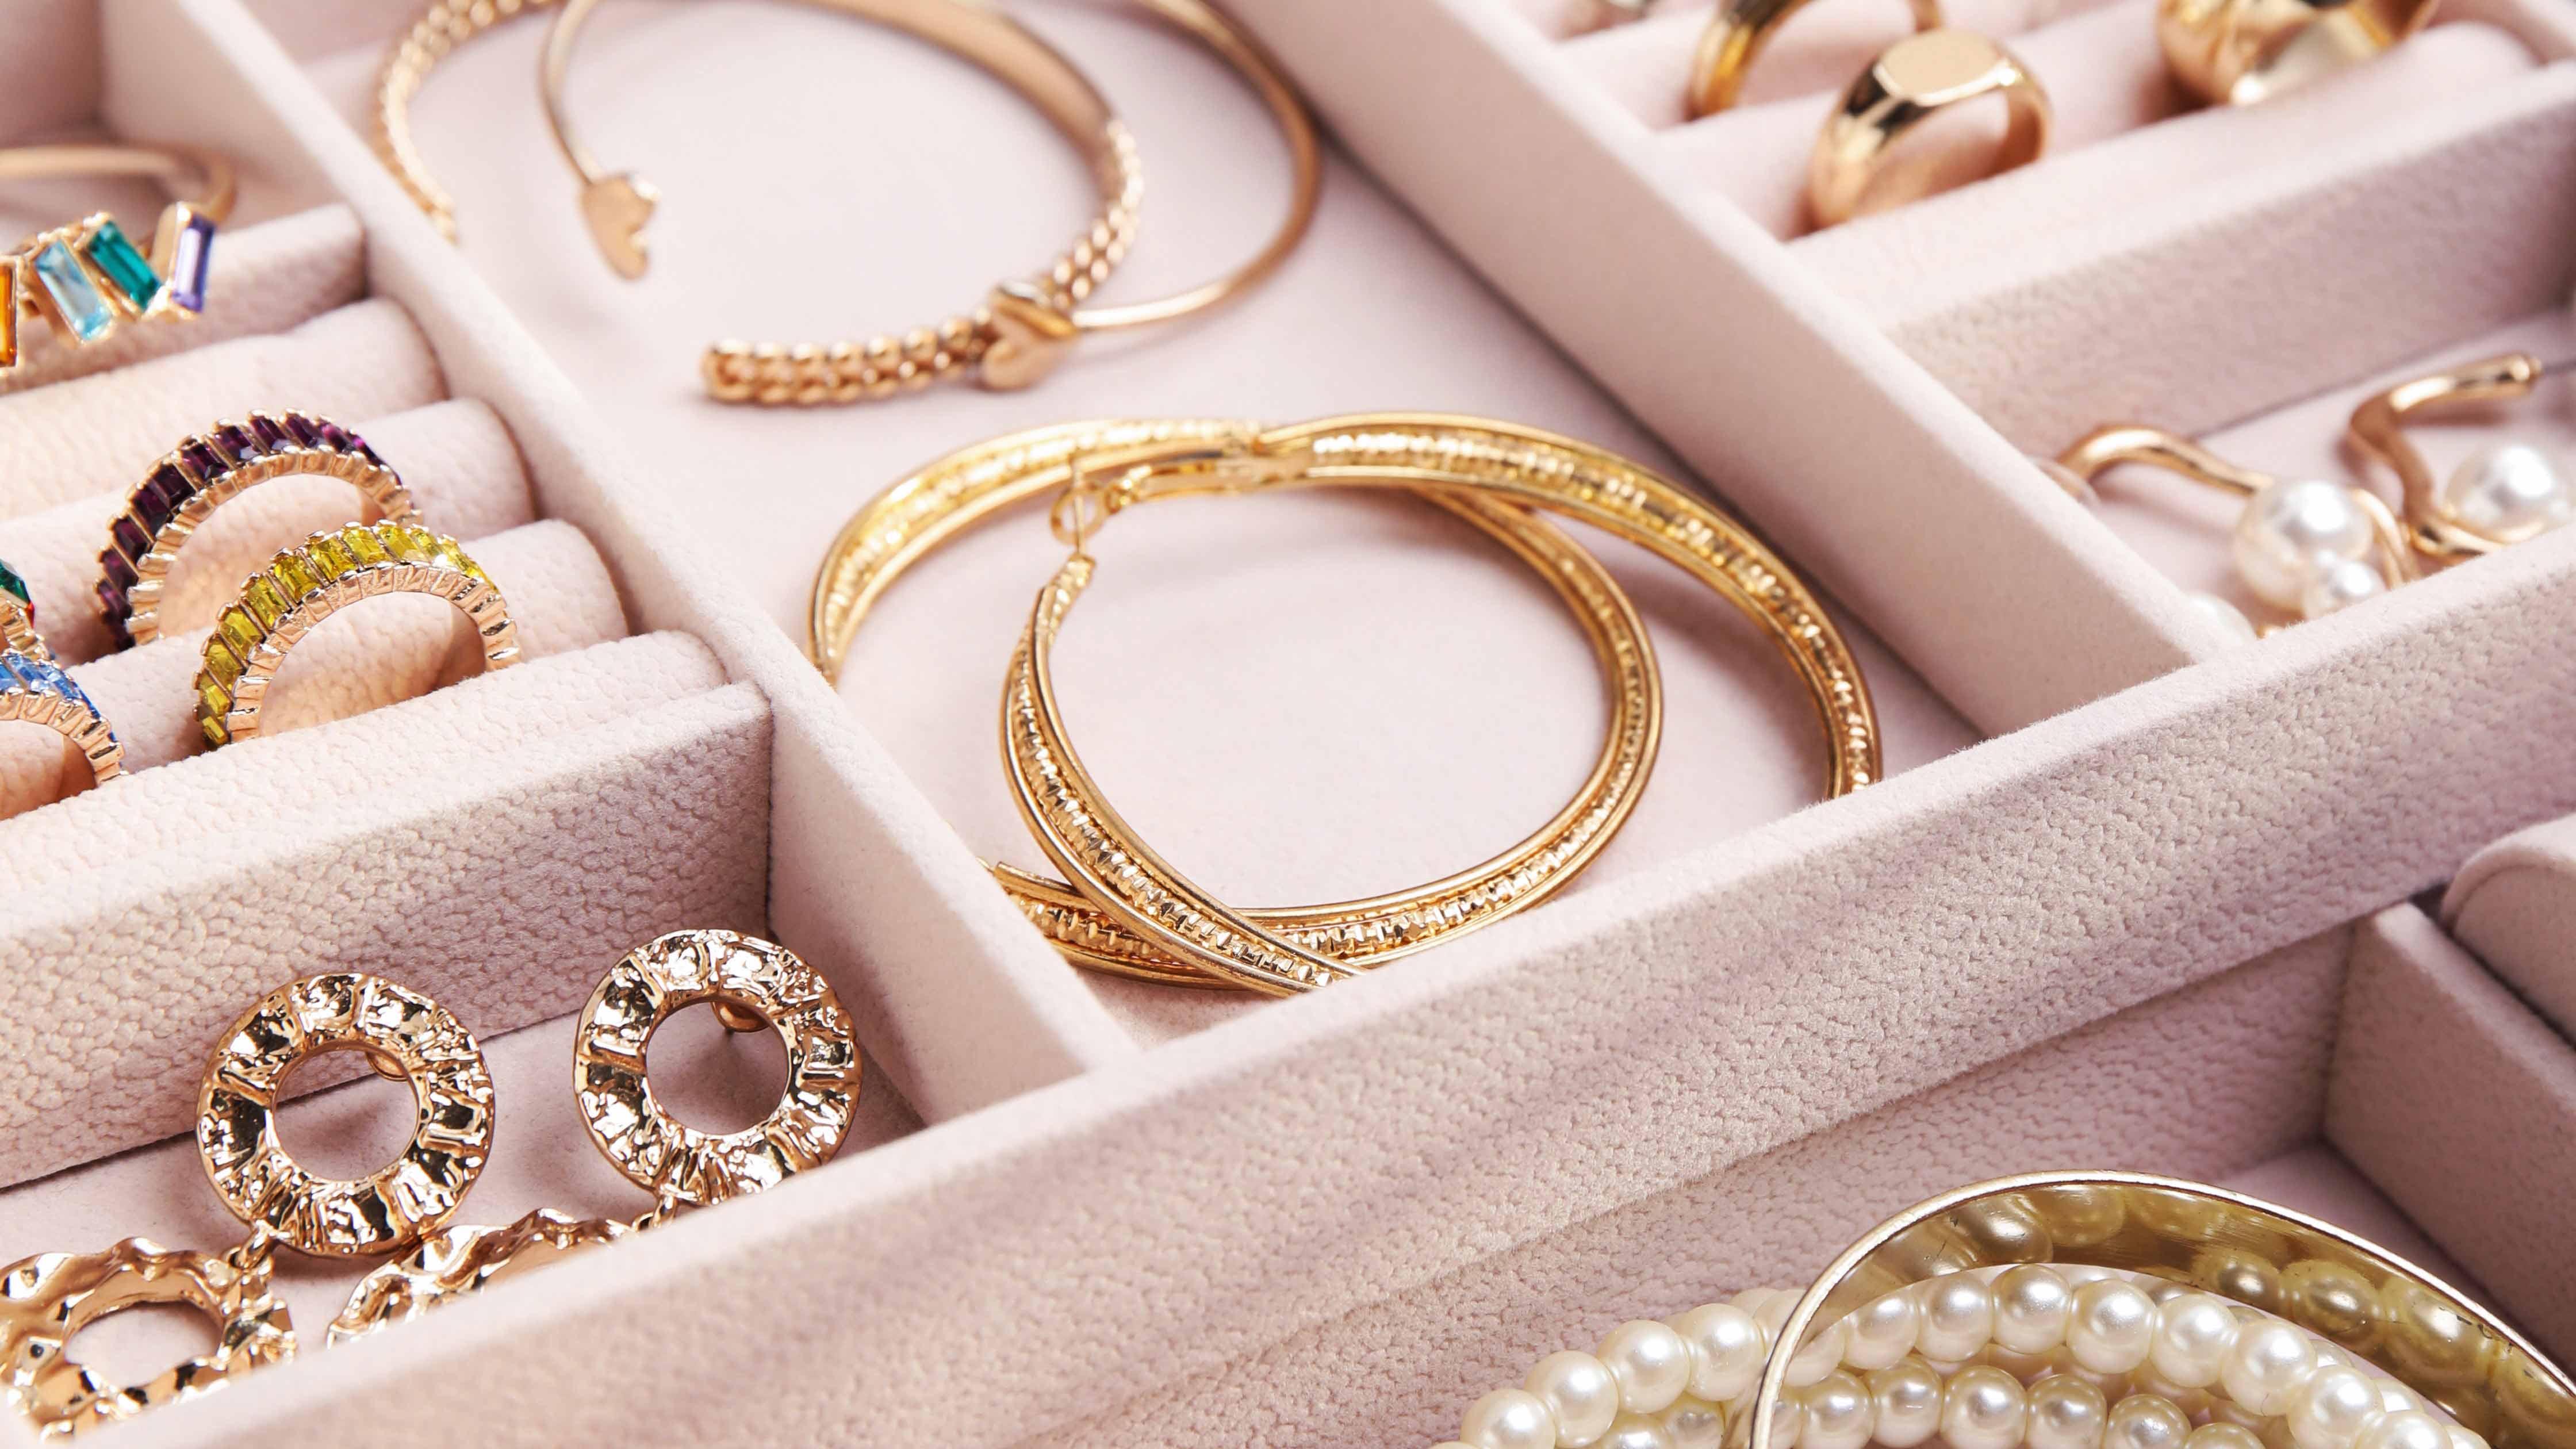 Safely Packing Jewelry for Travel